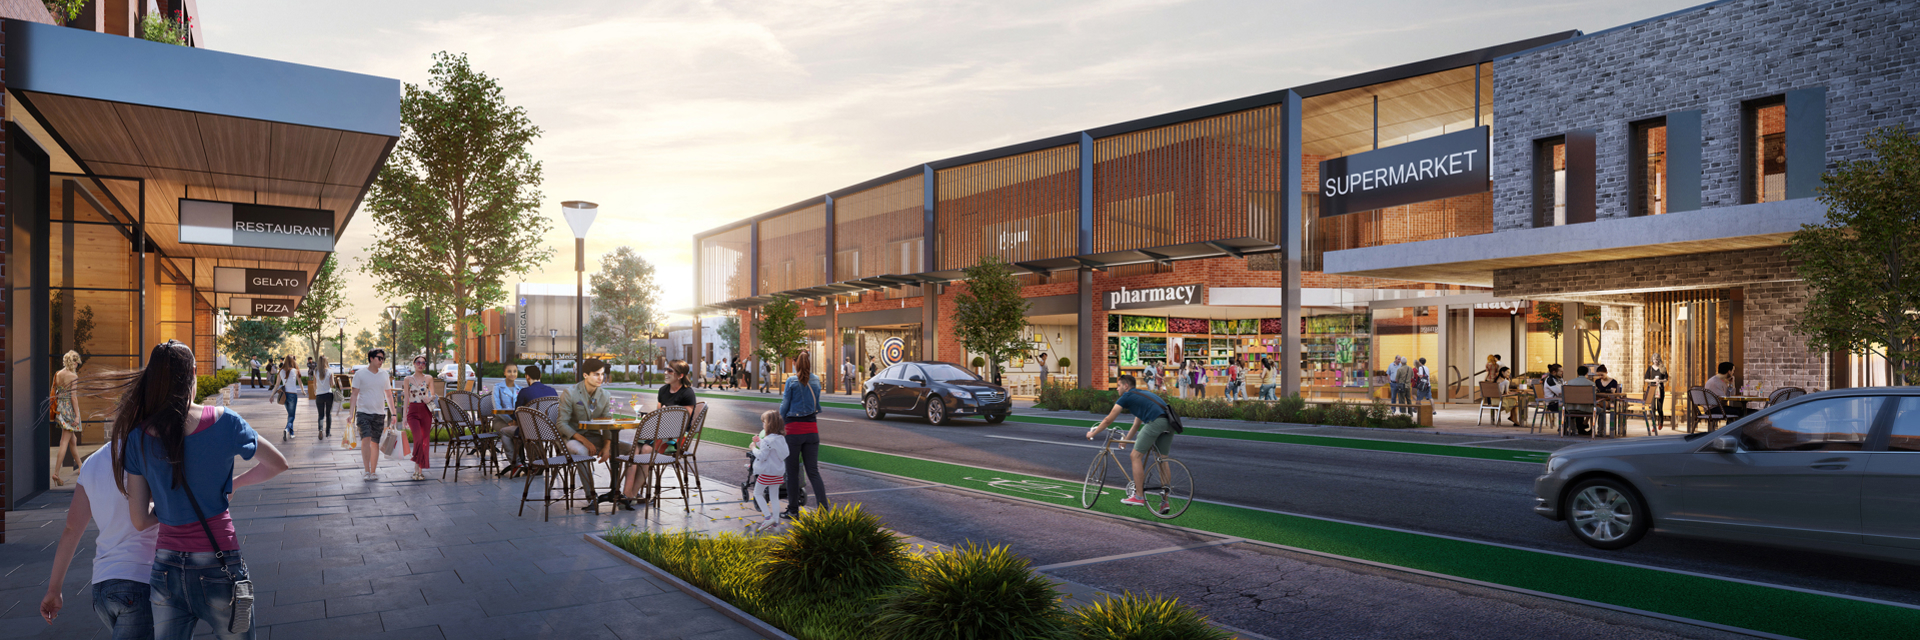 A render of the St Germain Central retail precinct